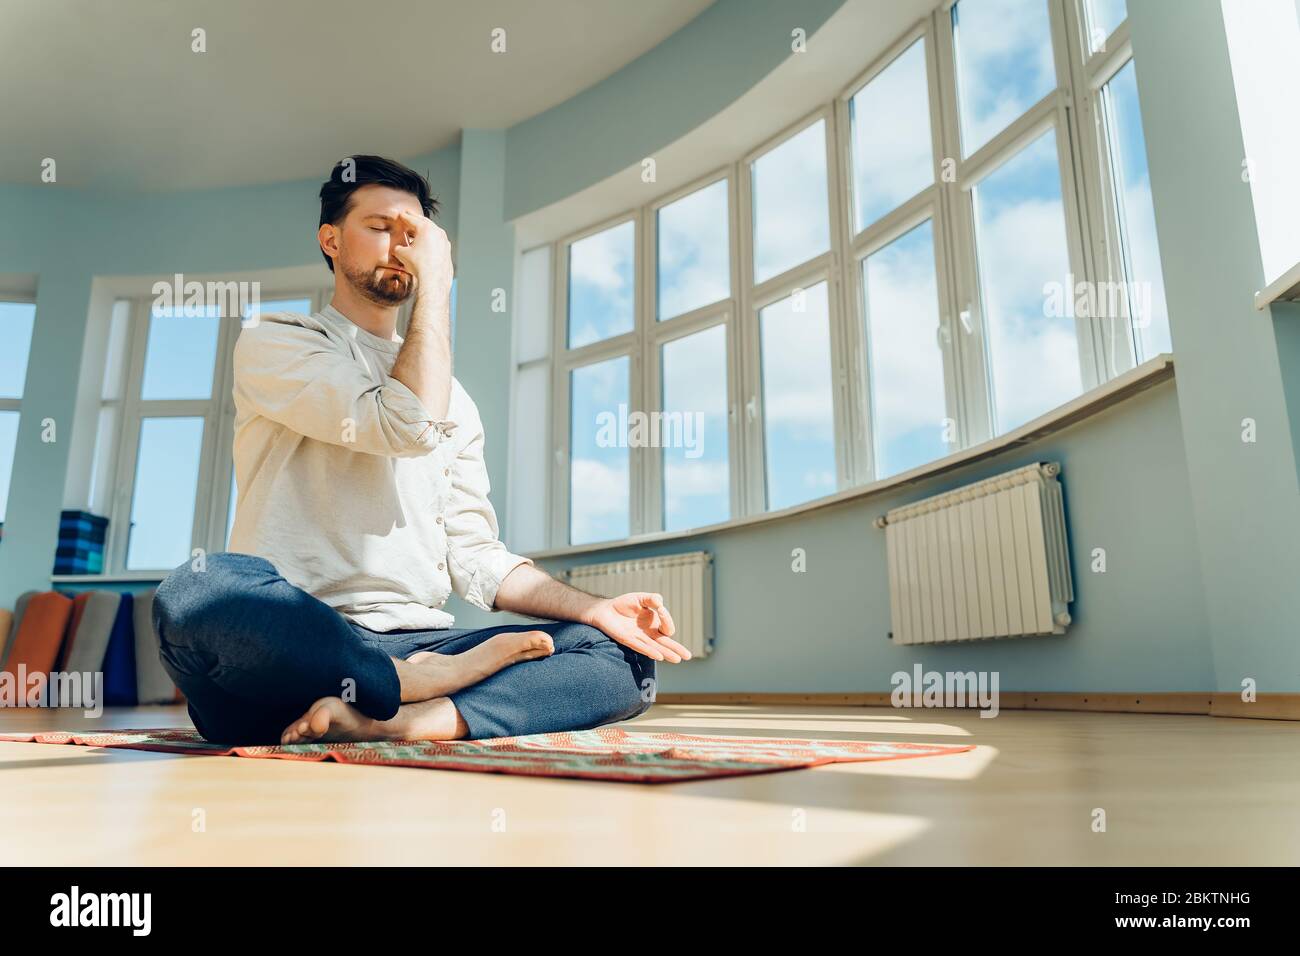 Man practice yoga. Young attractive male doing breathing exercises. Guy meditating at home along during the pandemic. Relaxation and resting concept Stock Photo